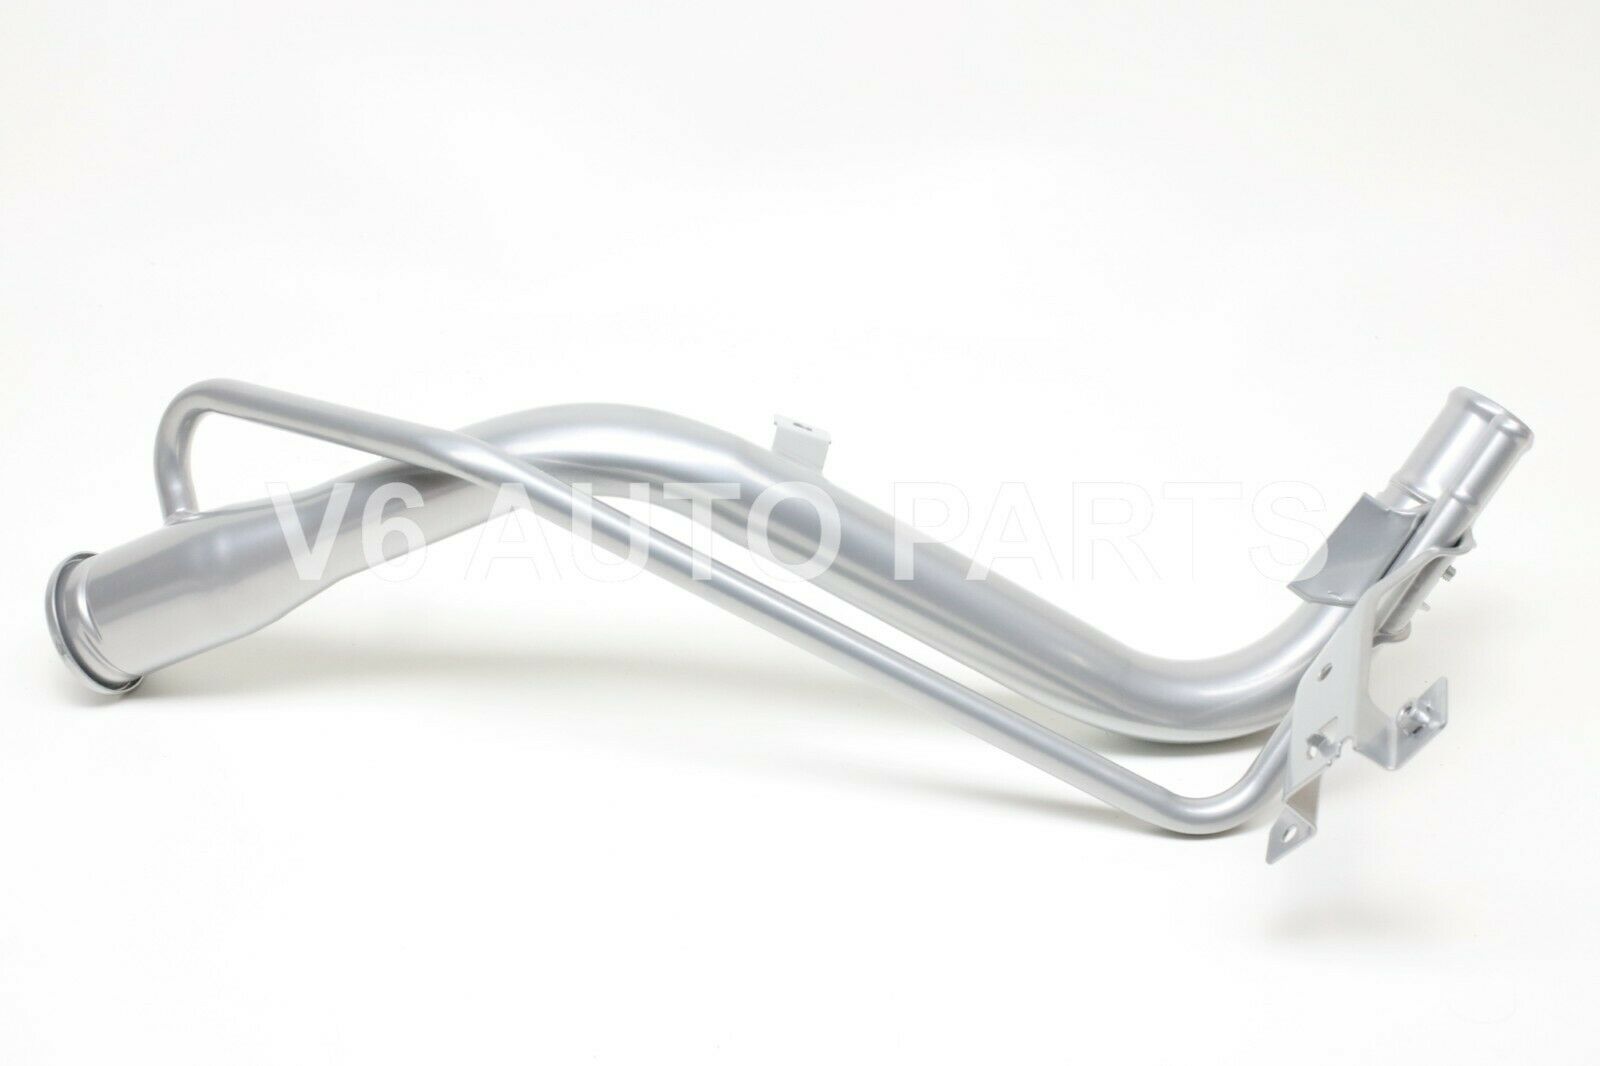 17660S5AE31 FUEL TANK FILLER NECK PIPE FOR 2000 - 2005 HONDA CIVIC 1.7 1.4 FWD SALOON PETROL